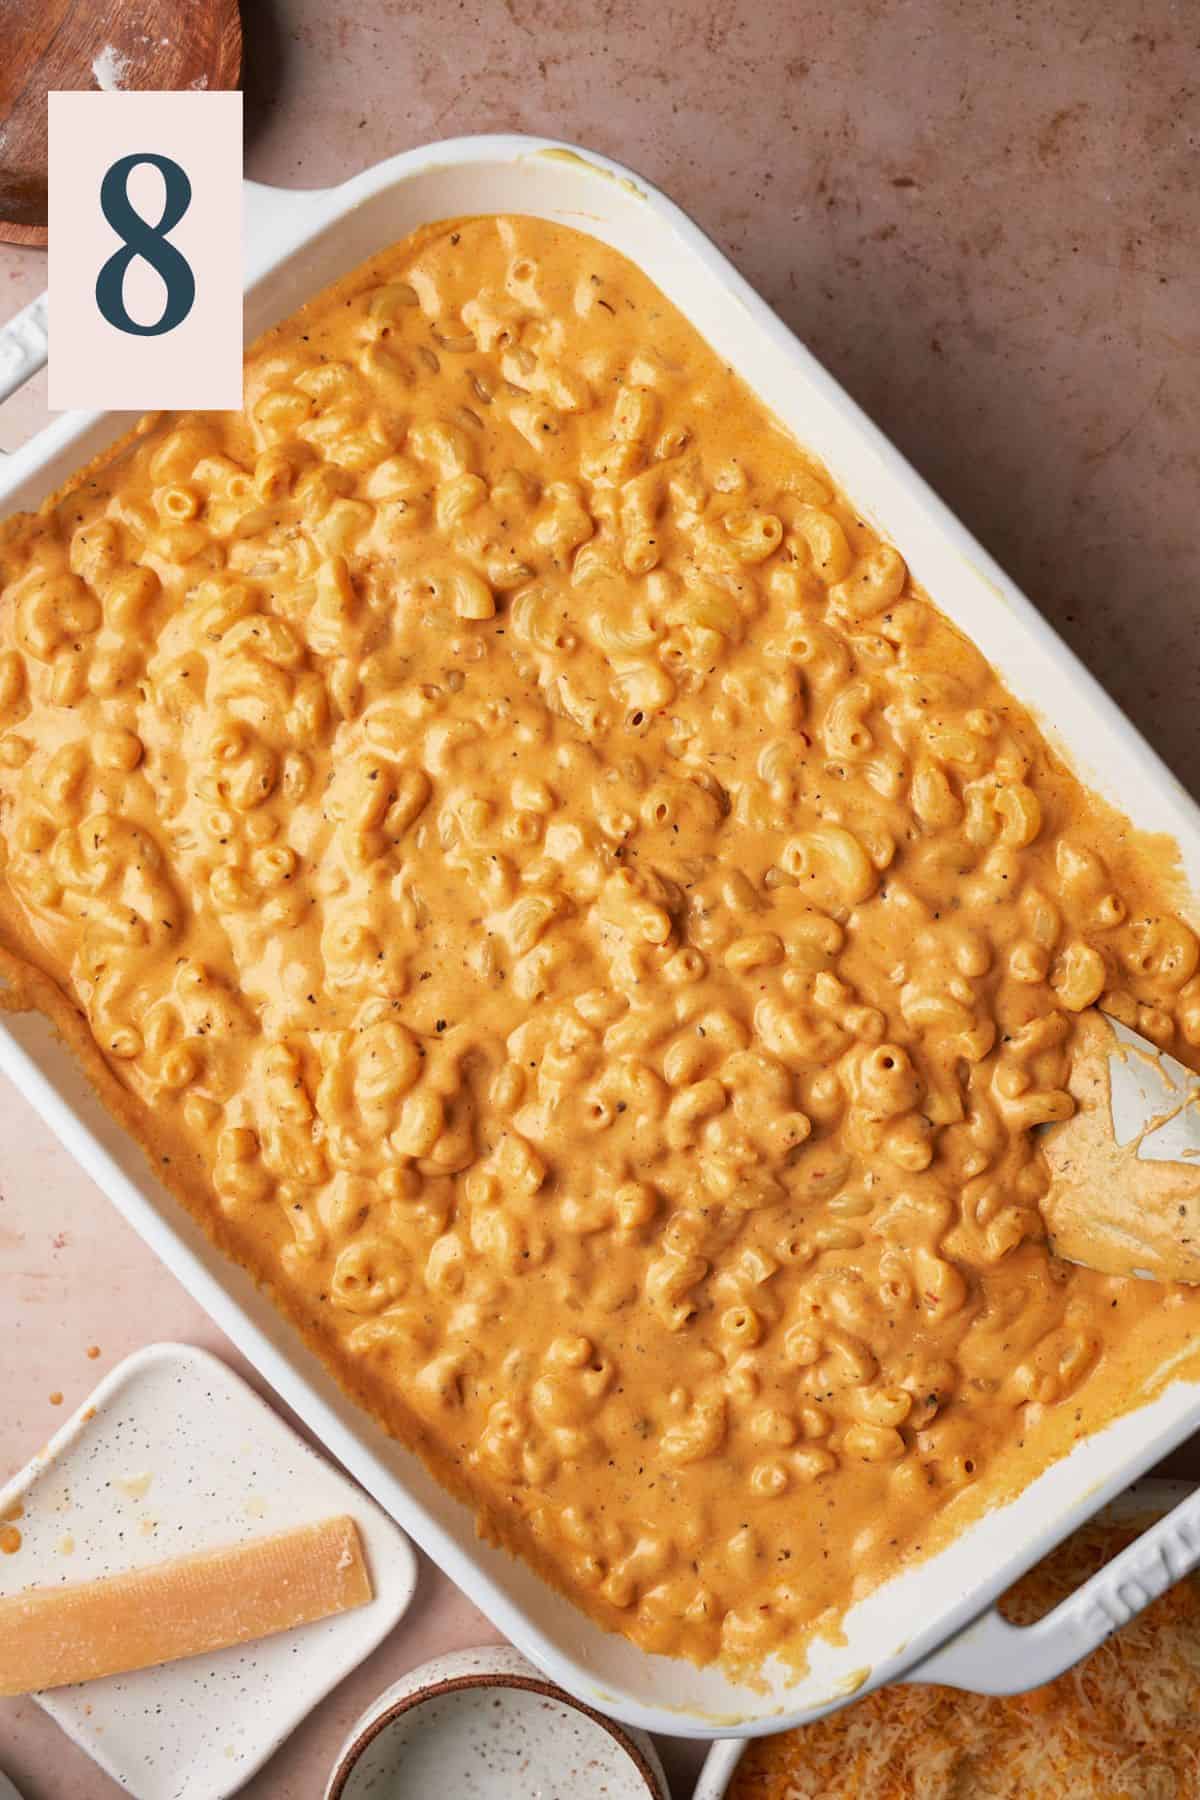 Macaroni and cheese sauce well combined in a casserole dish.